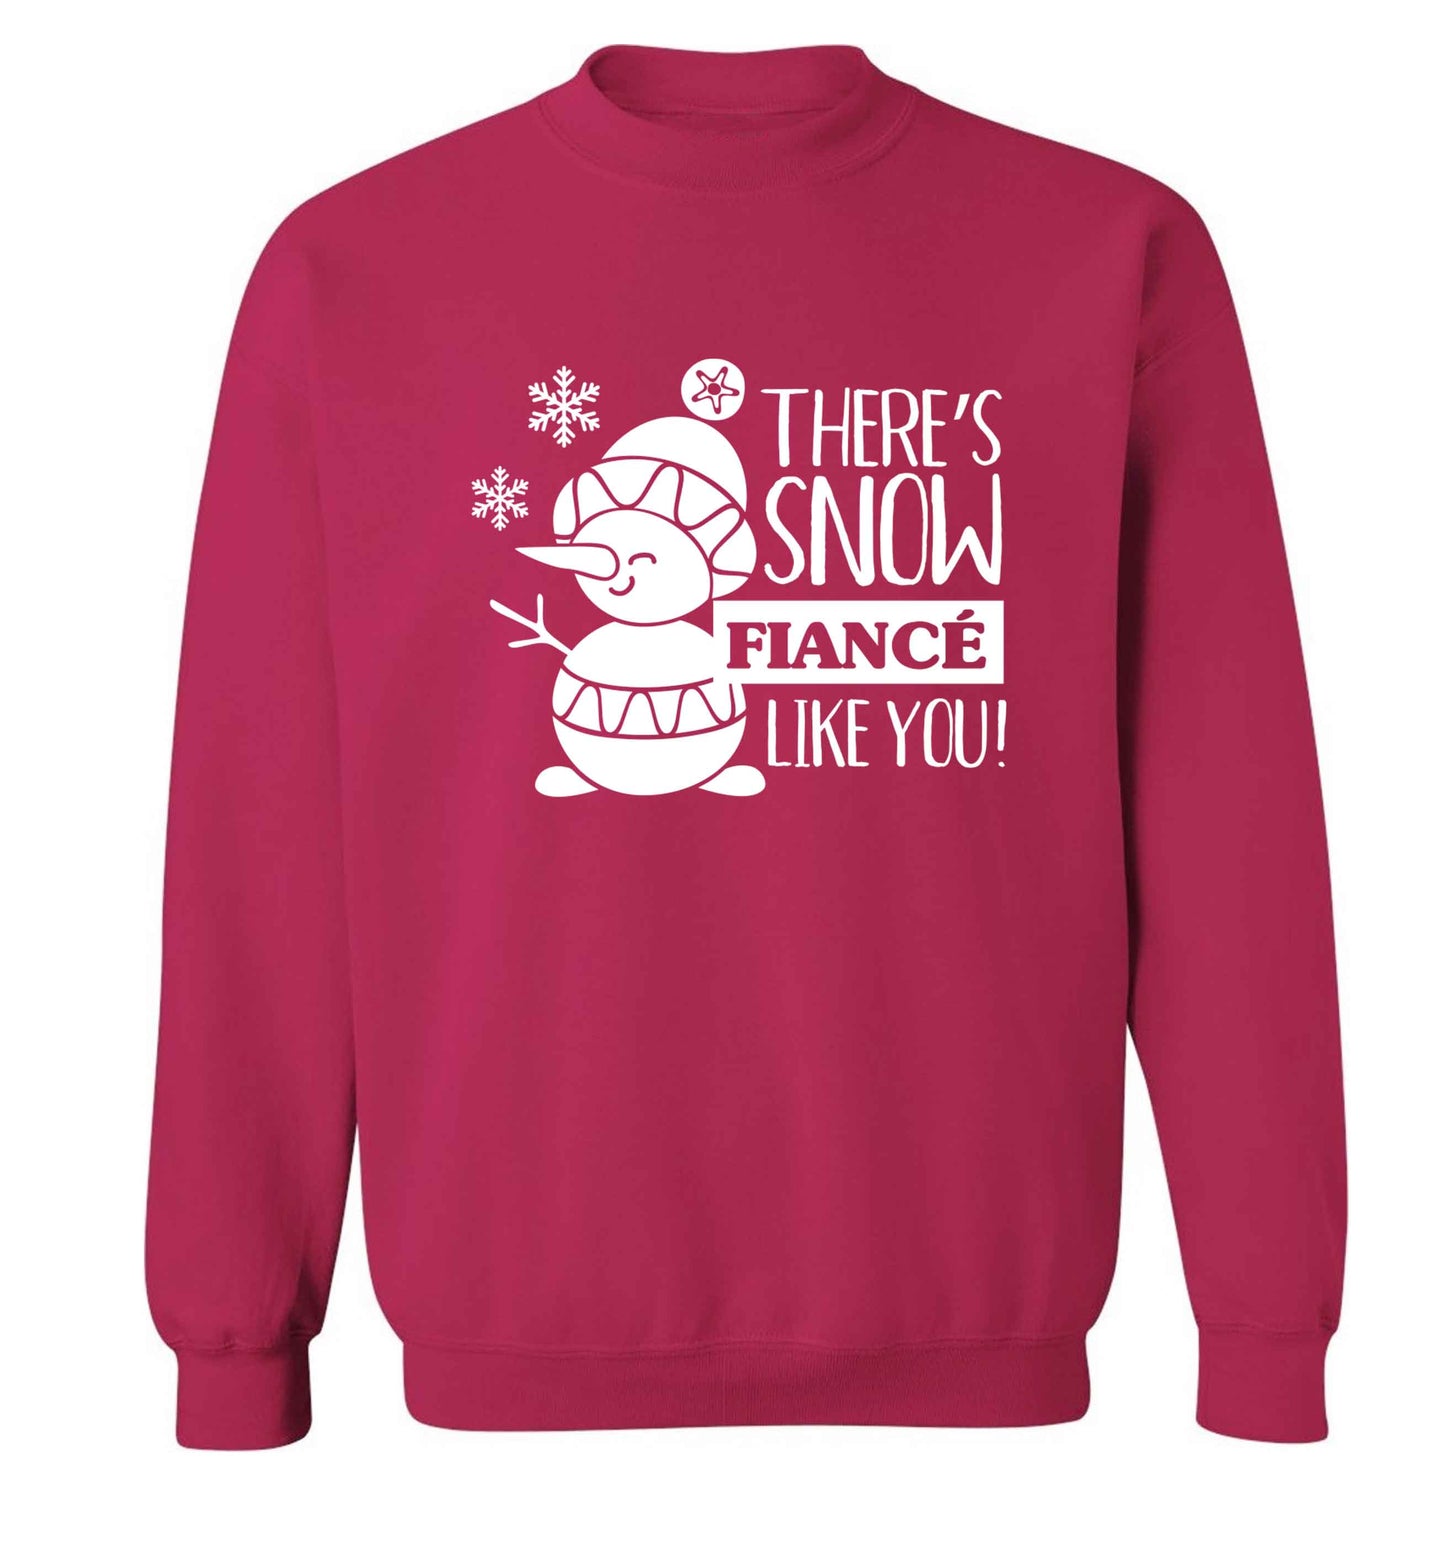 There's snow fiance like you adult's unisex pink sweater 2XL